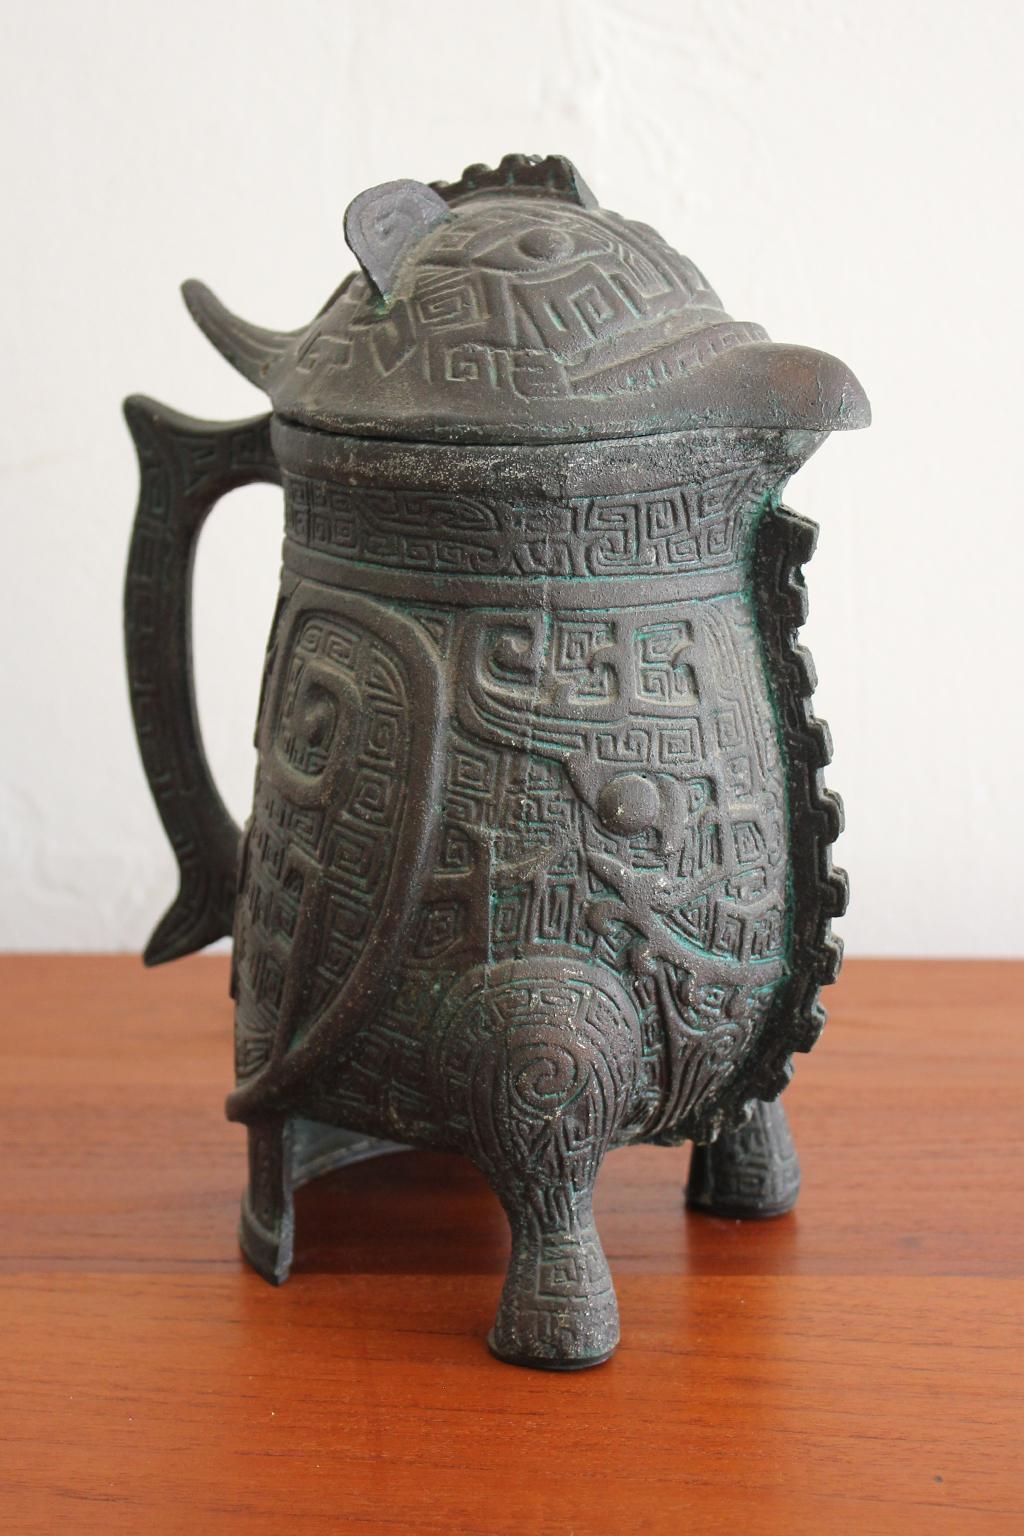 Great water pitcher in the manner of James Mont, circa 1960s. Has a Chinese/Asian design with a Verdigris finish. The water pitcher is in excellent shape with very light use over the years.
Measures 7 1/2